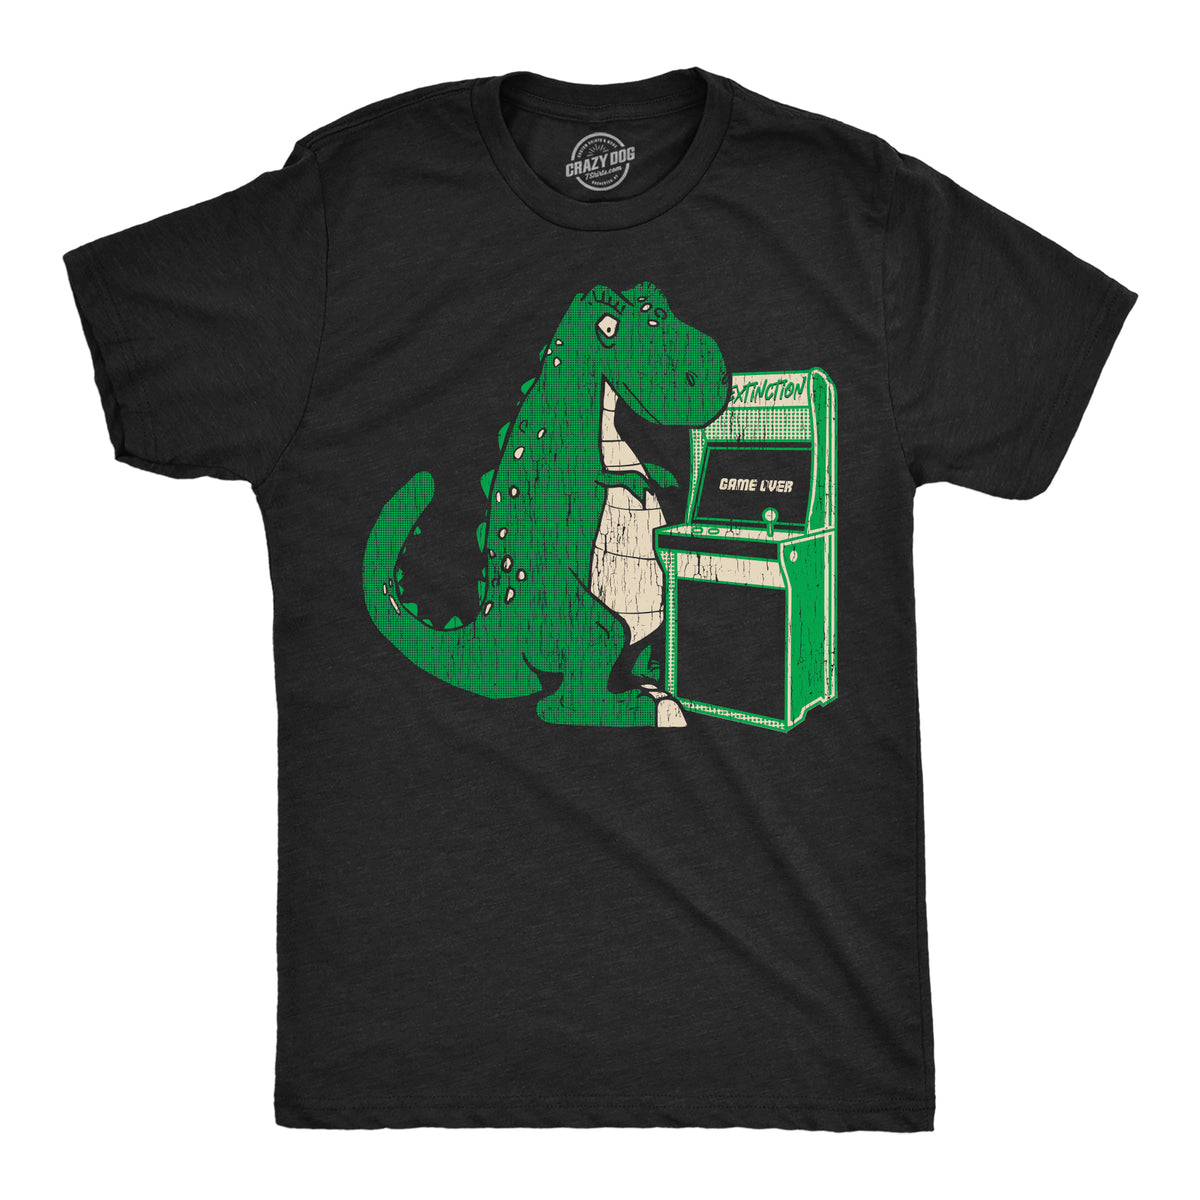 Funny Heather Black - Game Over T Rex Game Over T Rex Mens T Shirt Nerdy Video Games Dinosaur Tee